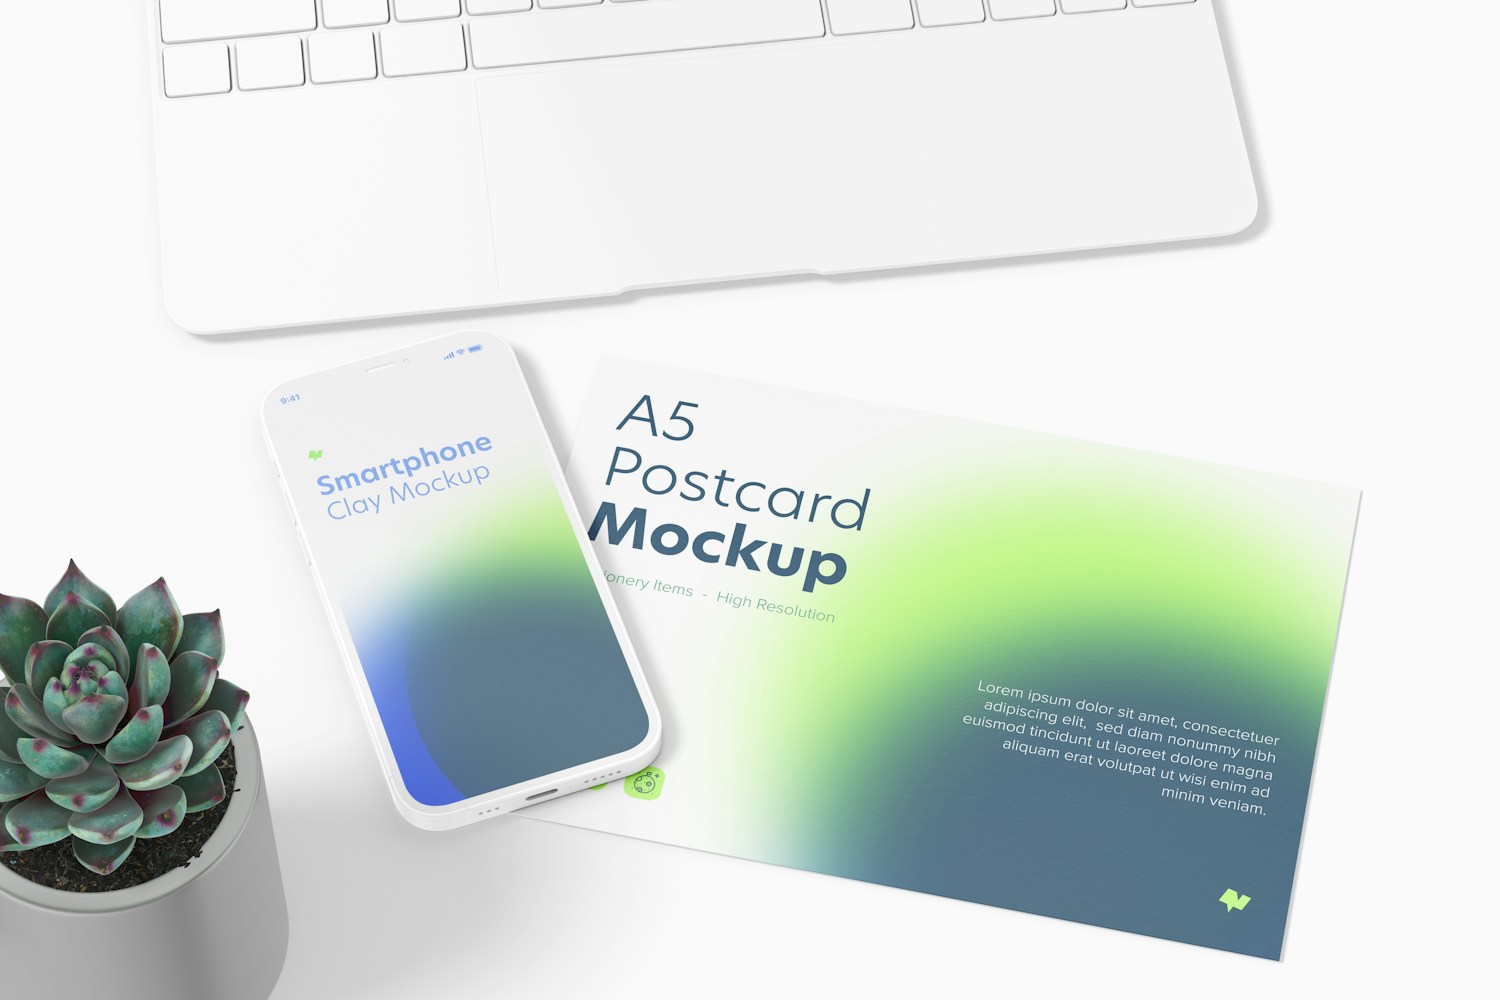 A5 Postcard with iPhone Mockup, Top View